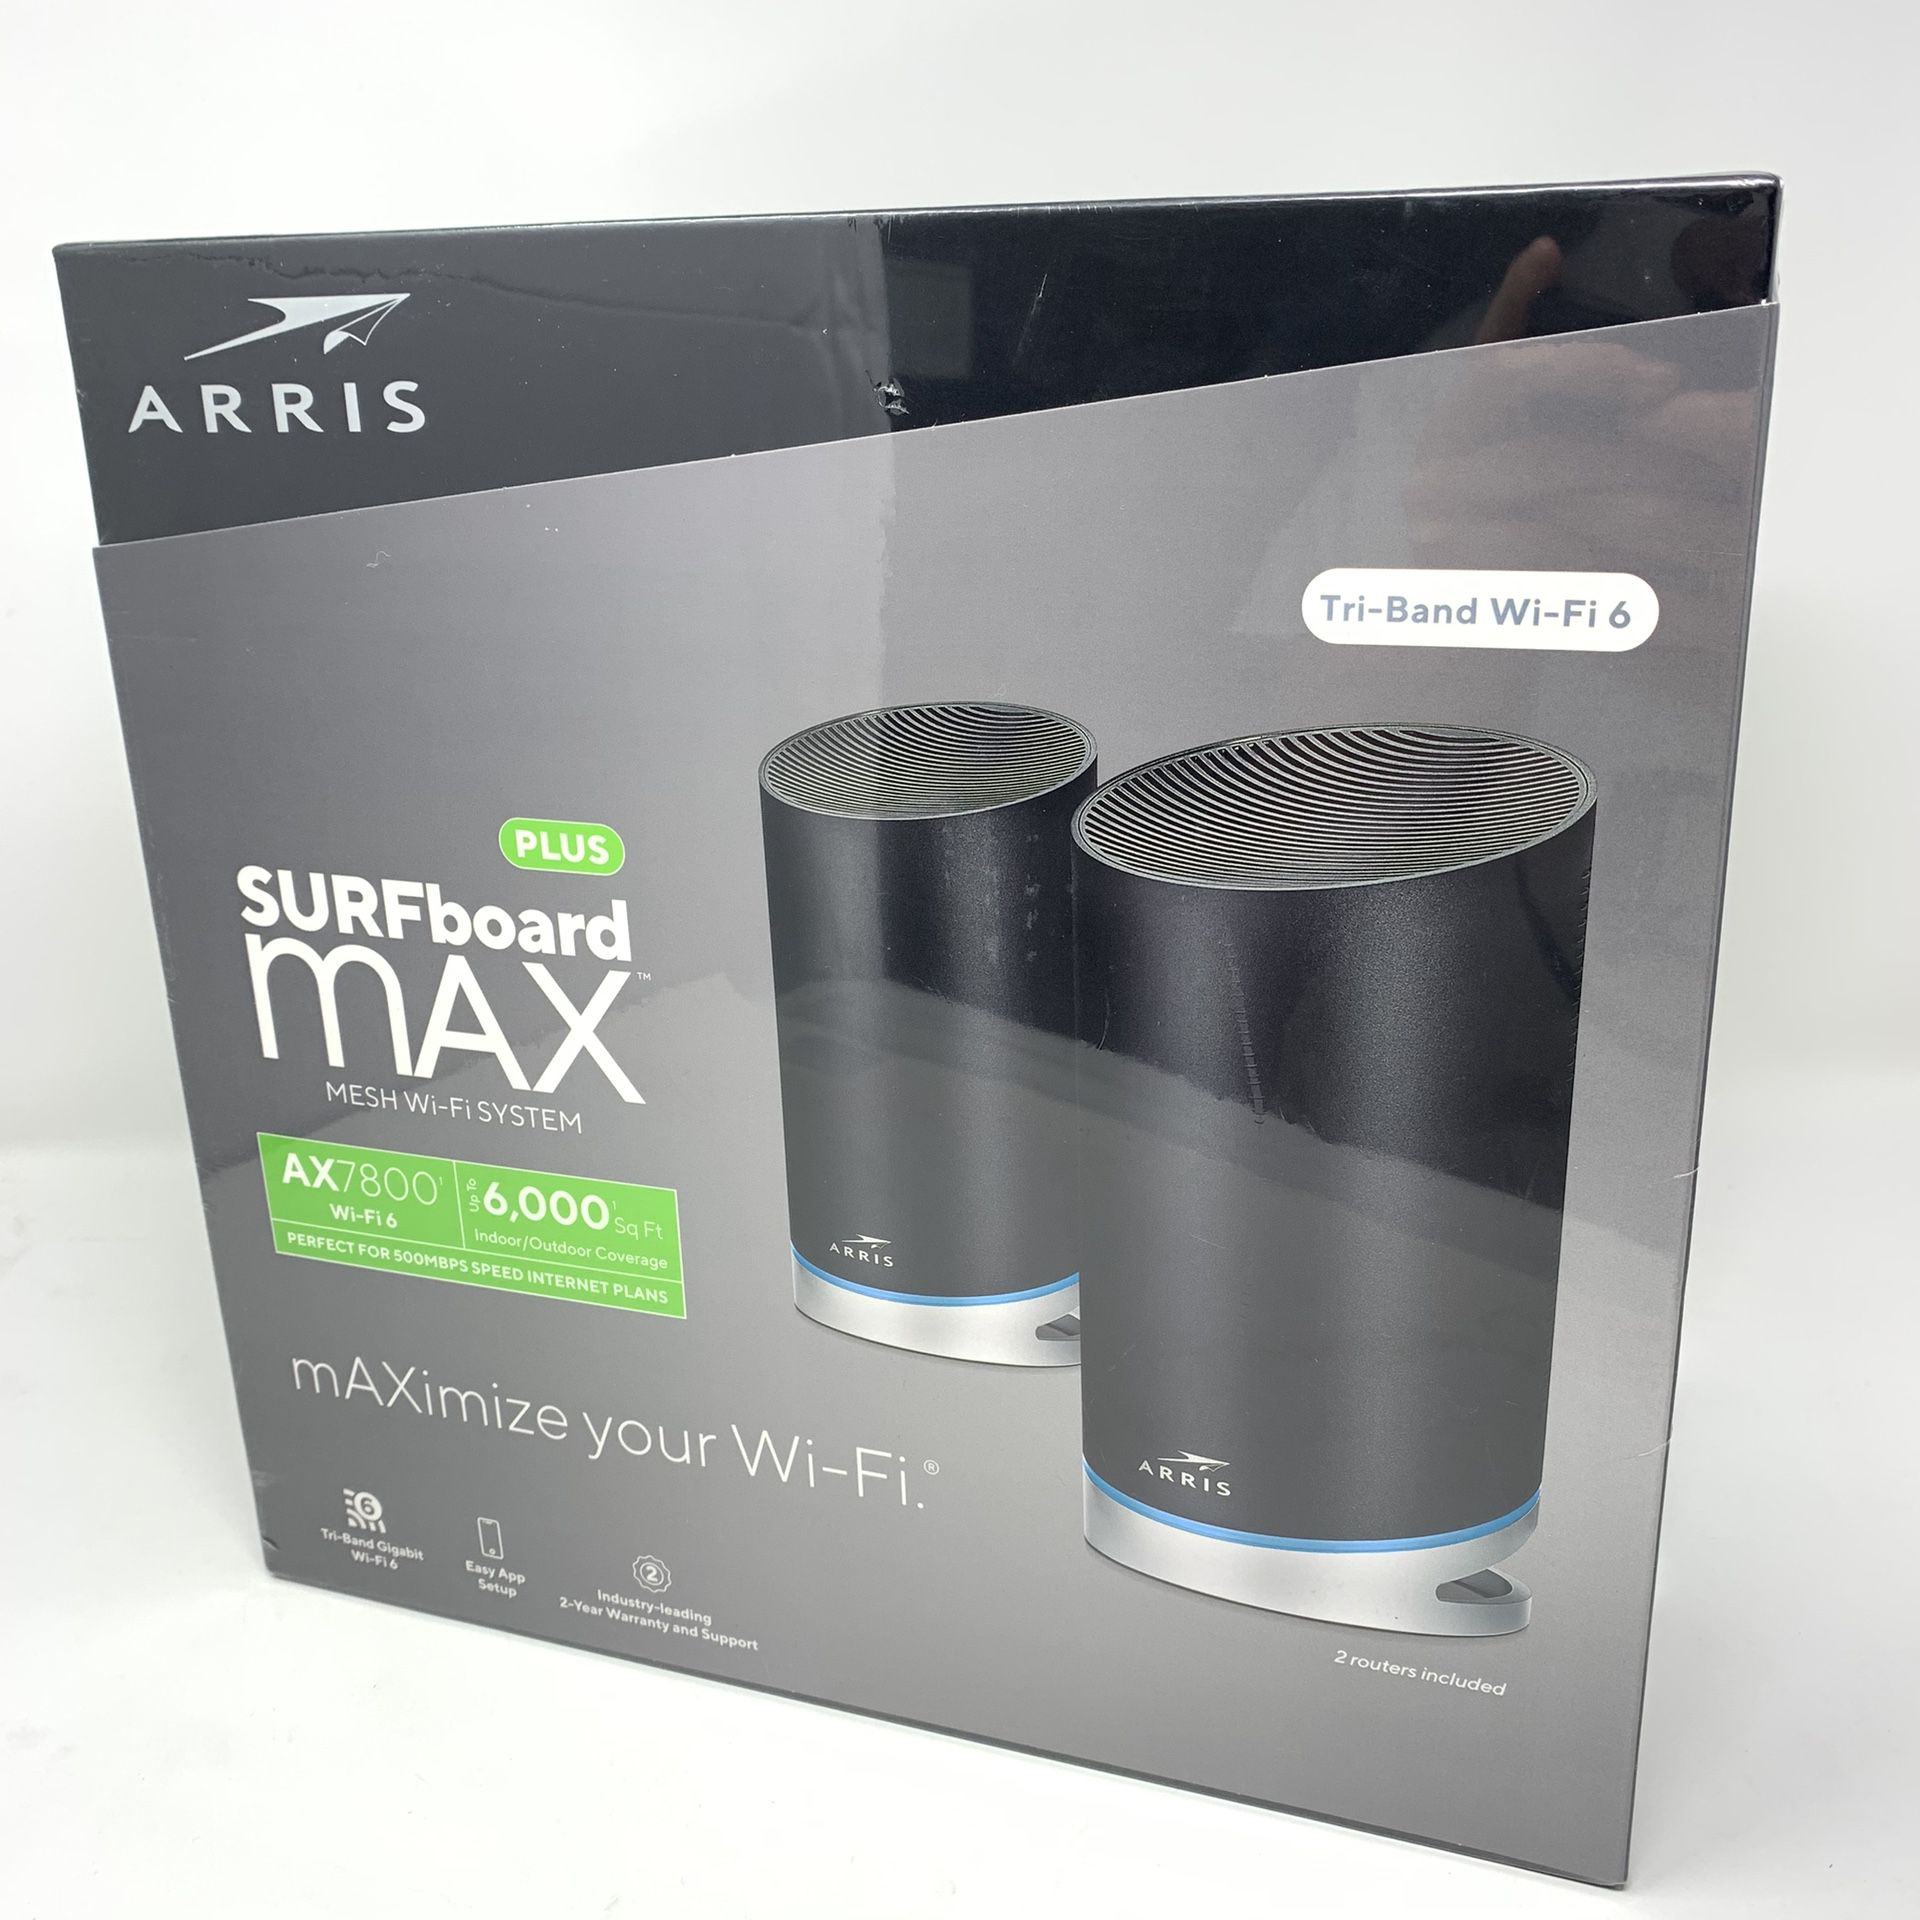 New ARRIS SURFboard mAX Plus Mesh AX7800 Wi-Fi 6 AX Tri-Band Router W130 System